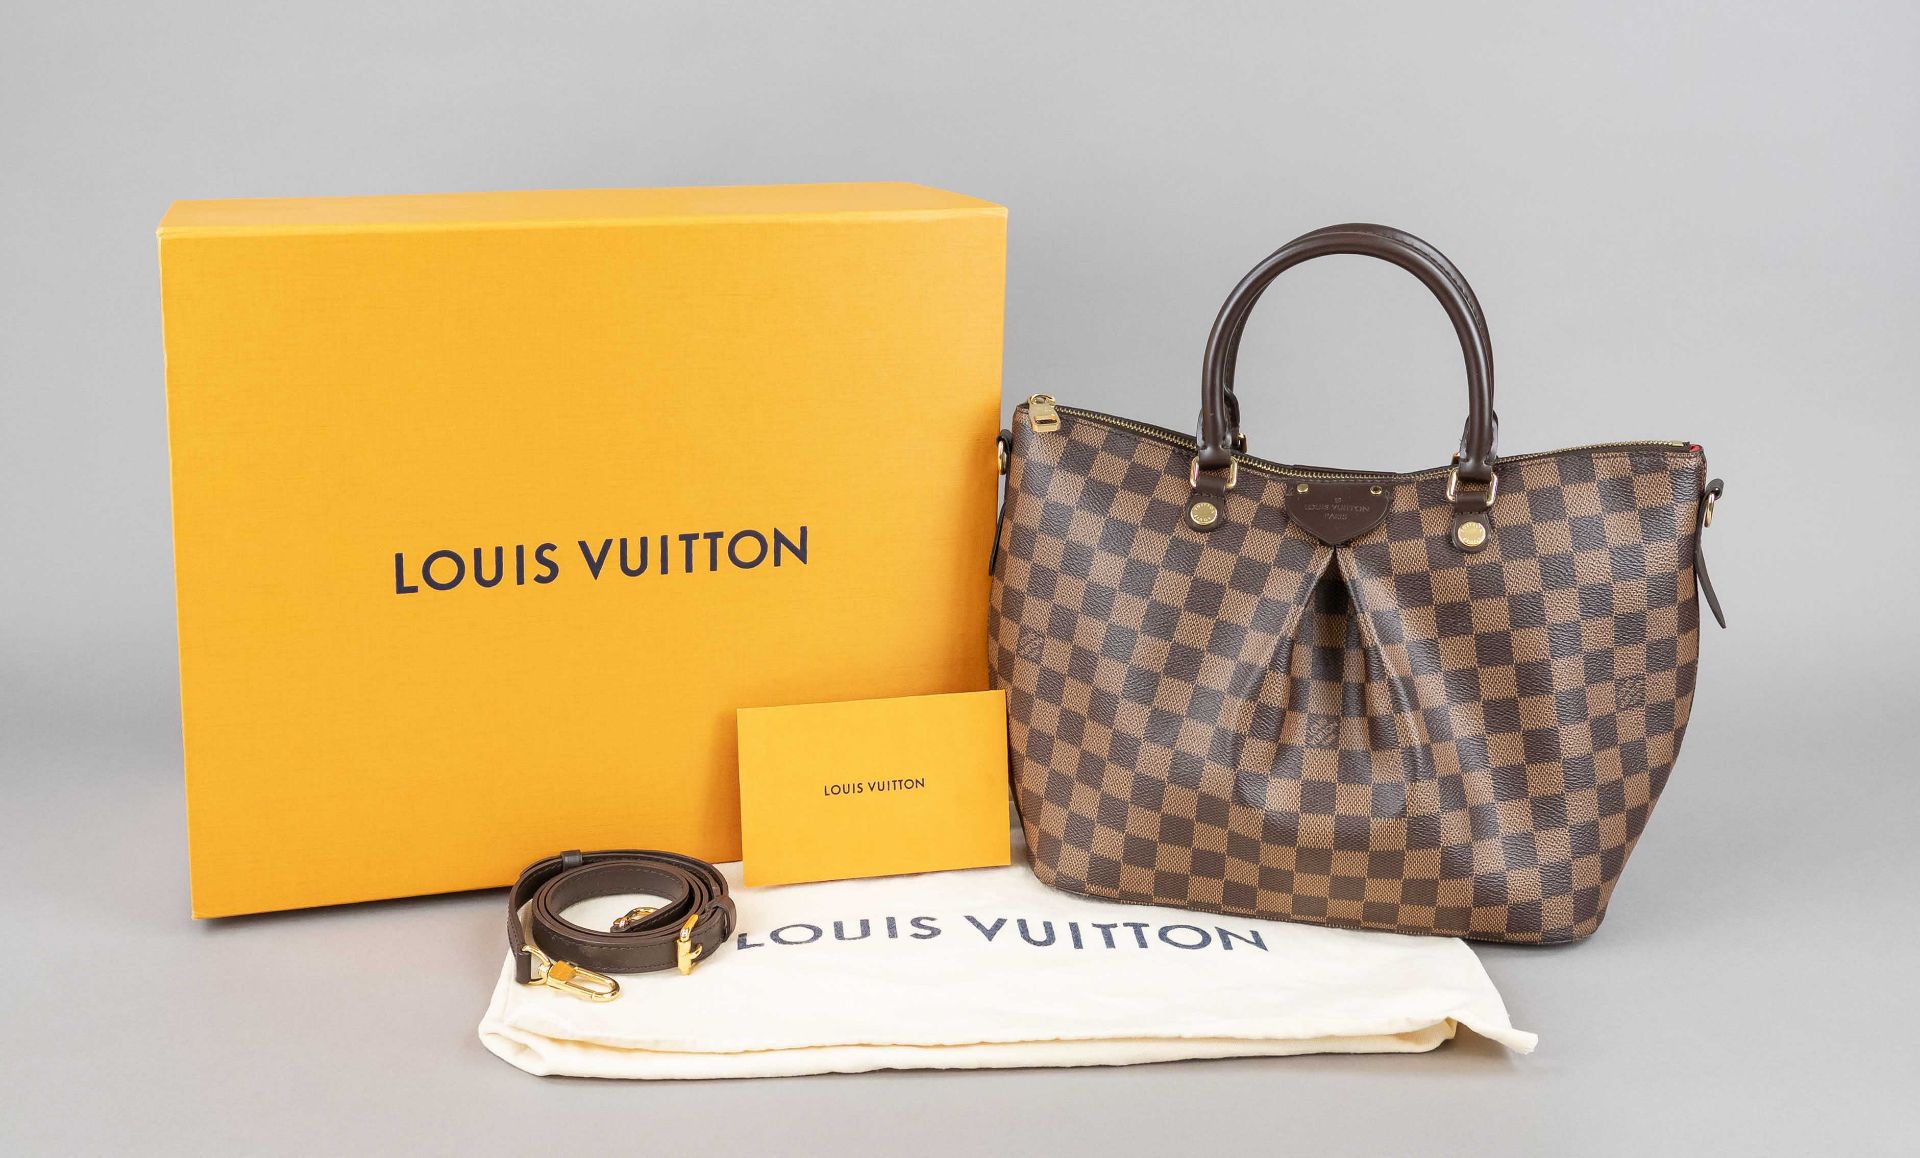 Louis Vuitton, Siena Damier Ebene MM Tote Bag, brown-checked rubberized cotton fabric with dark